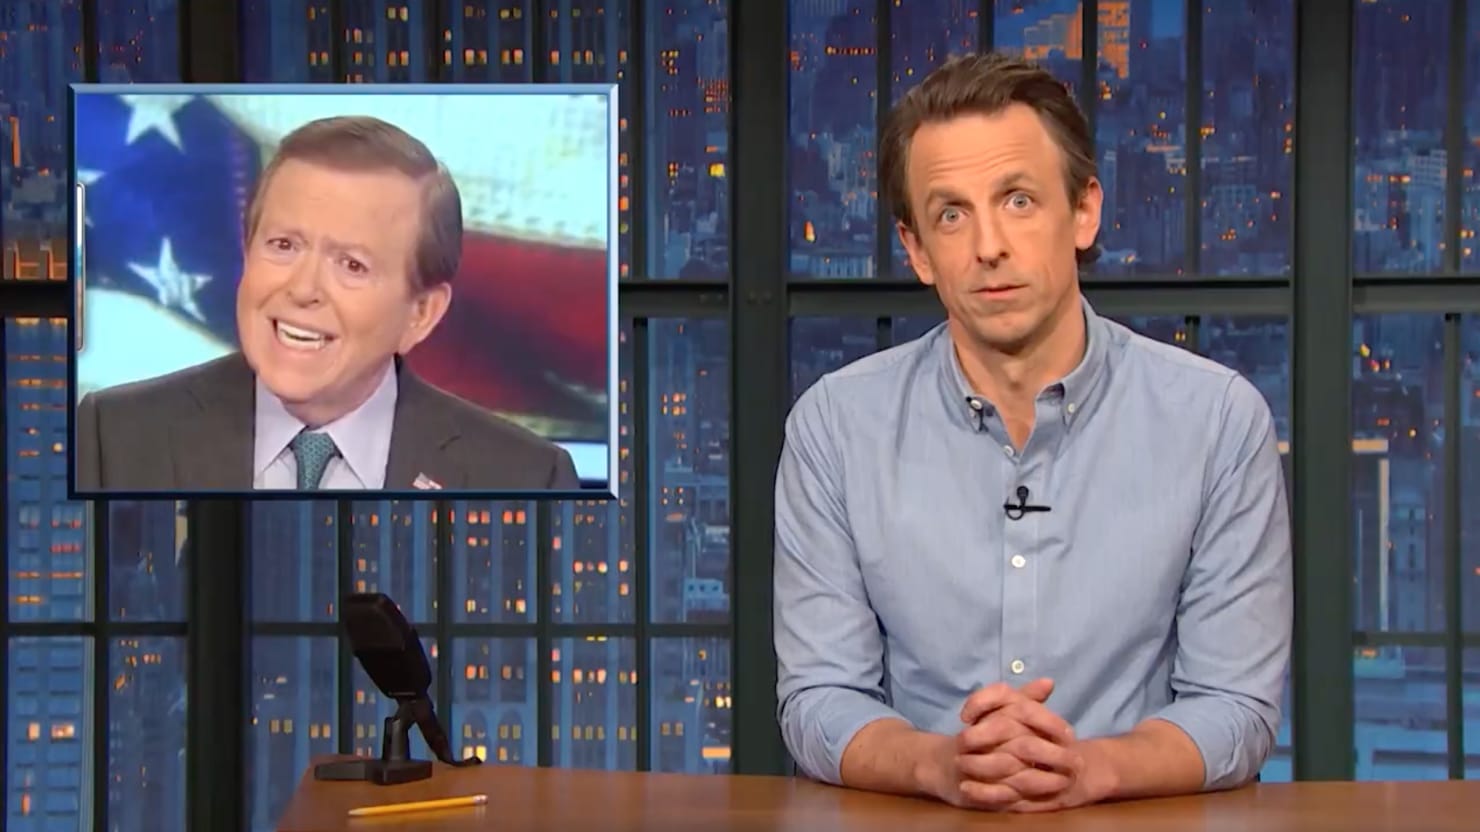 Seth Meyers sends out ‘True Crazy Person’ Lou Dobbs after Fox News cancellation